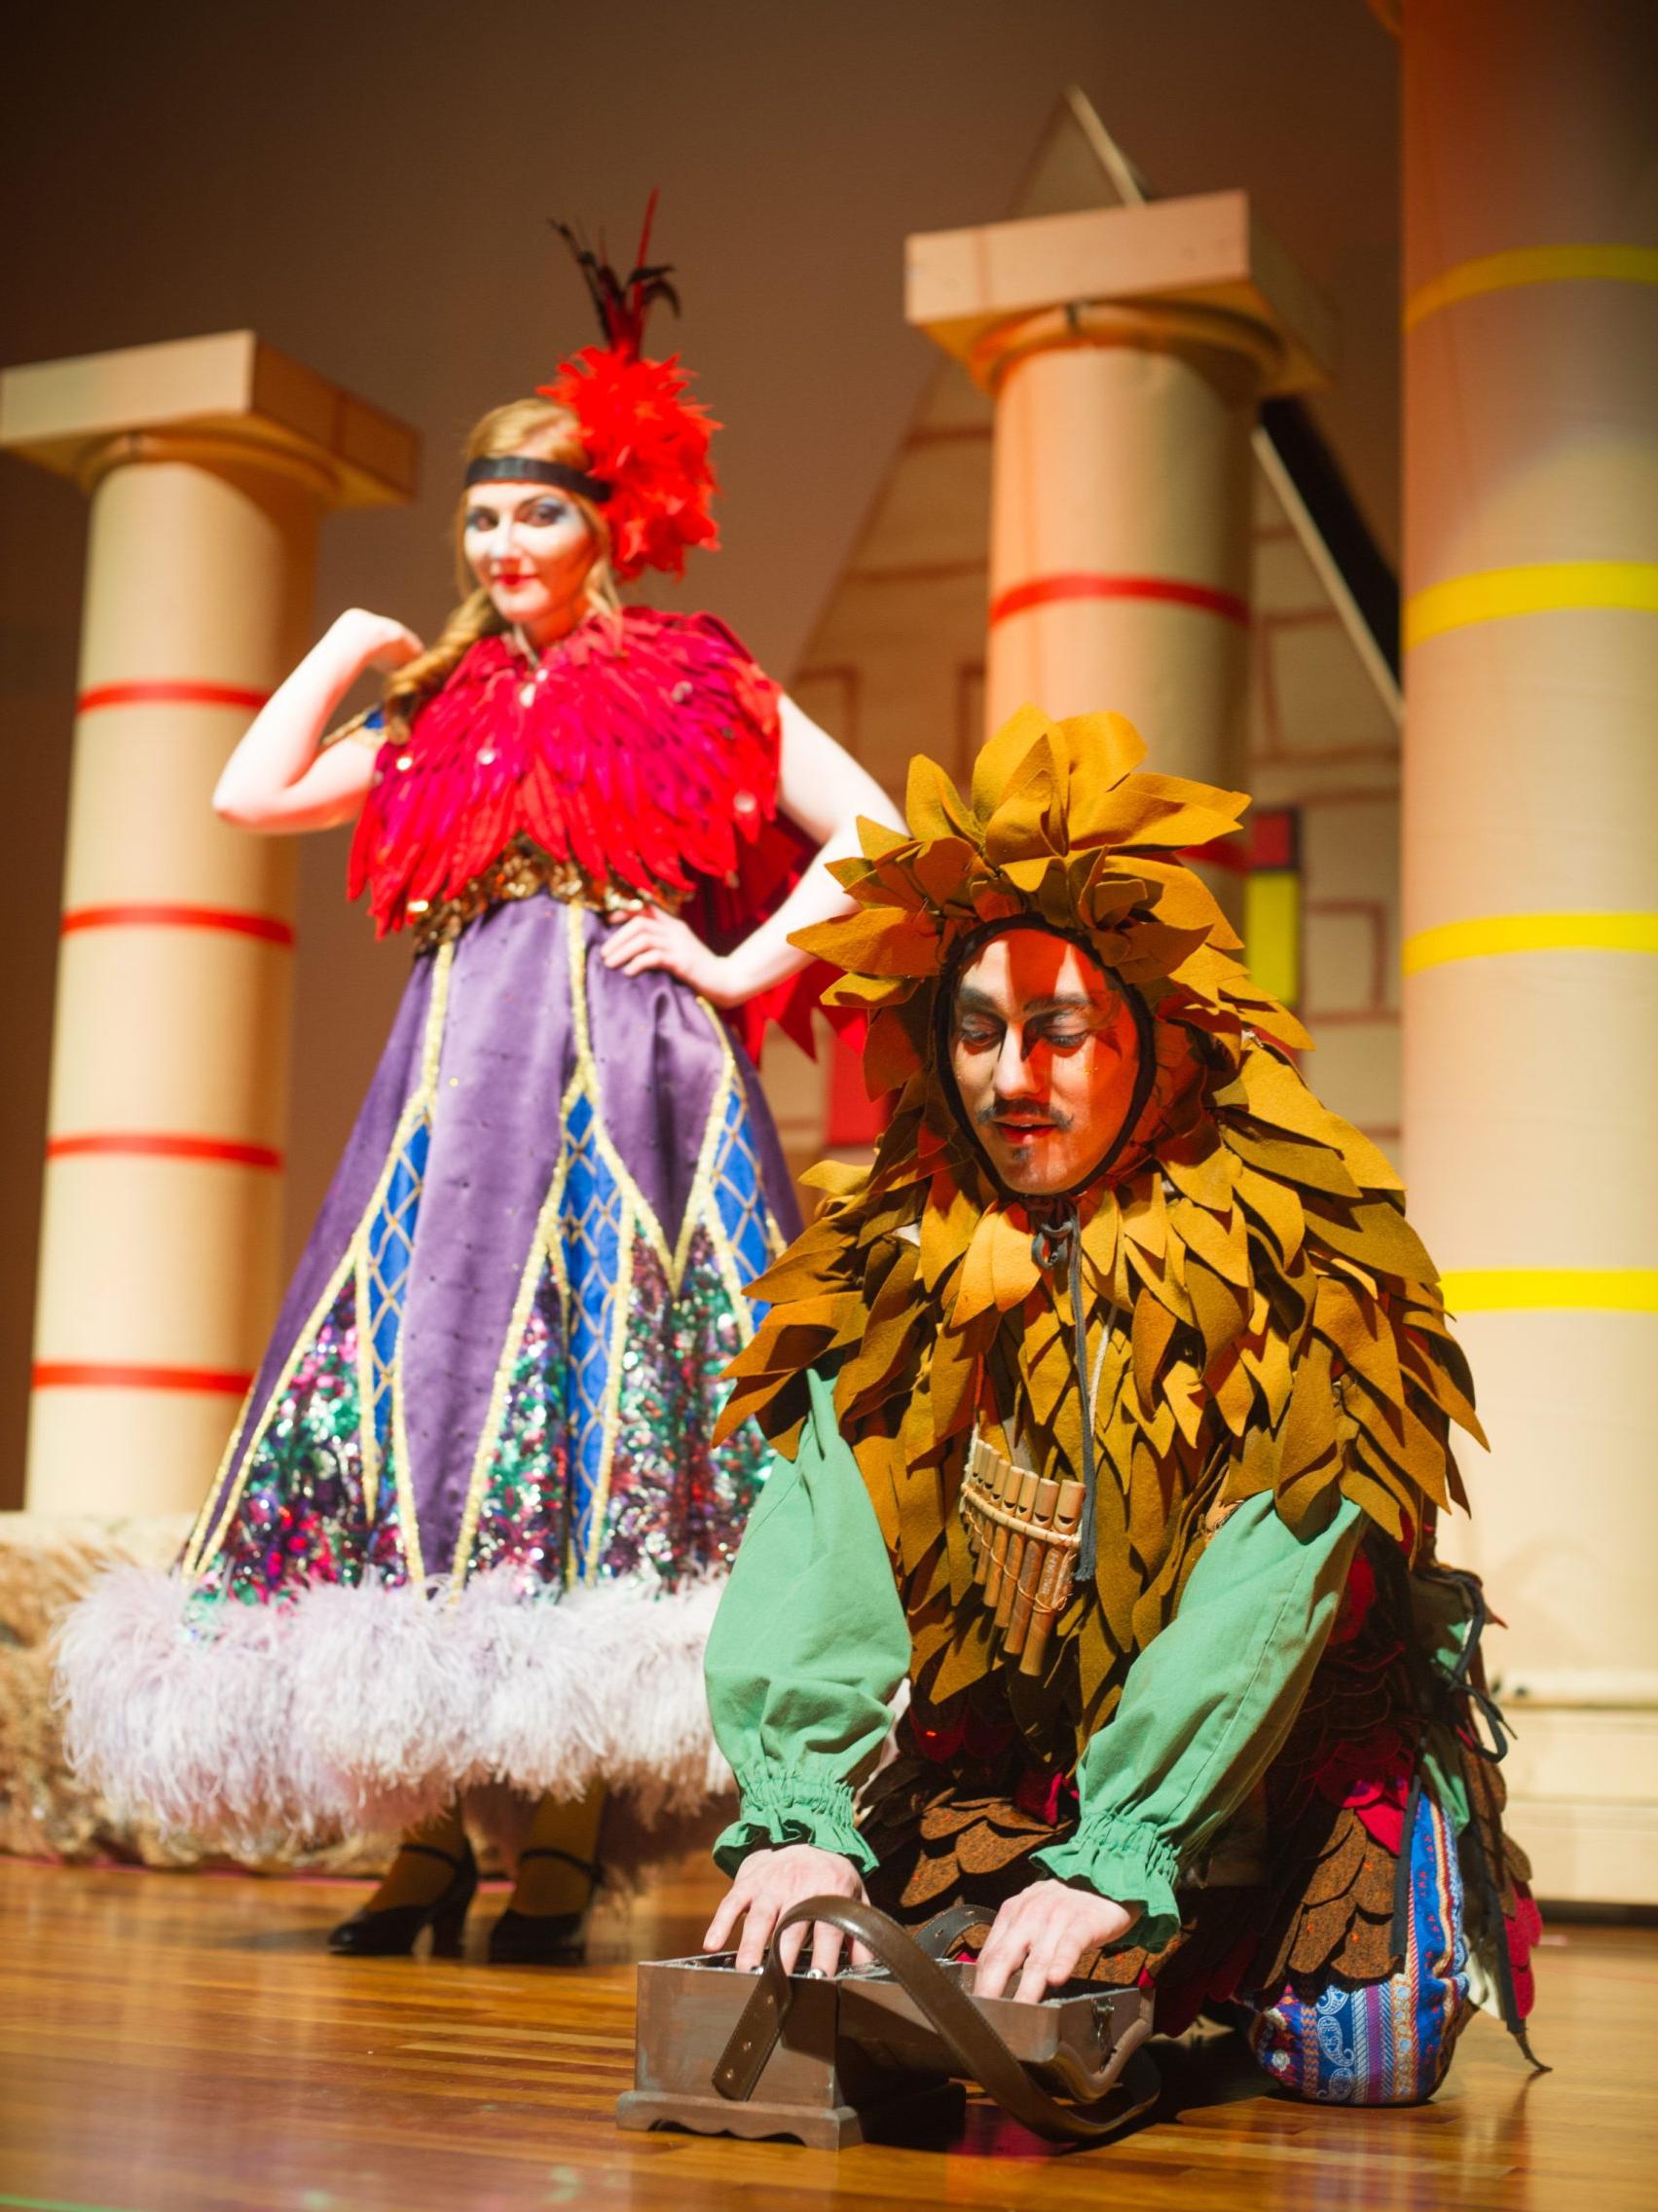 Man and woman wearing costumes on stage of theatrical performance